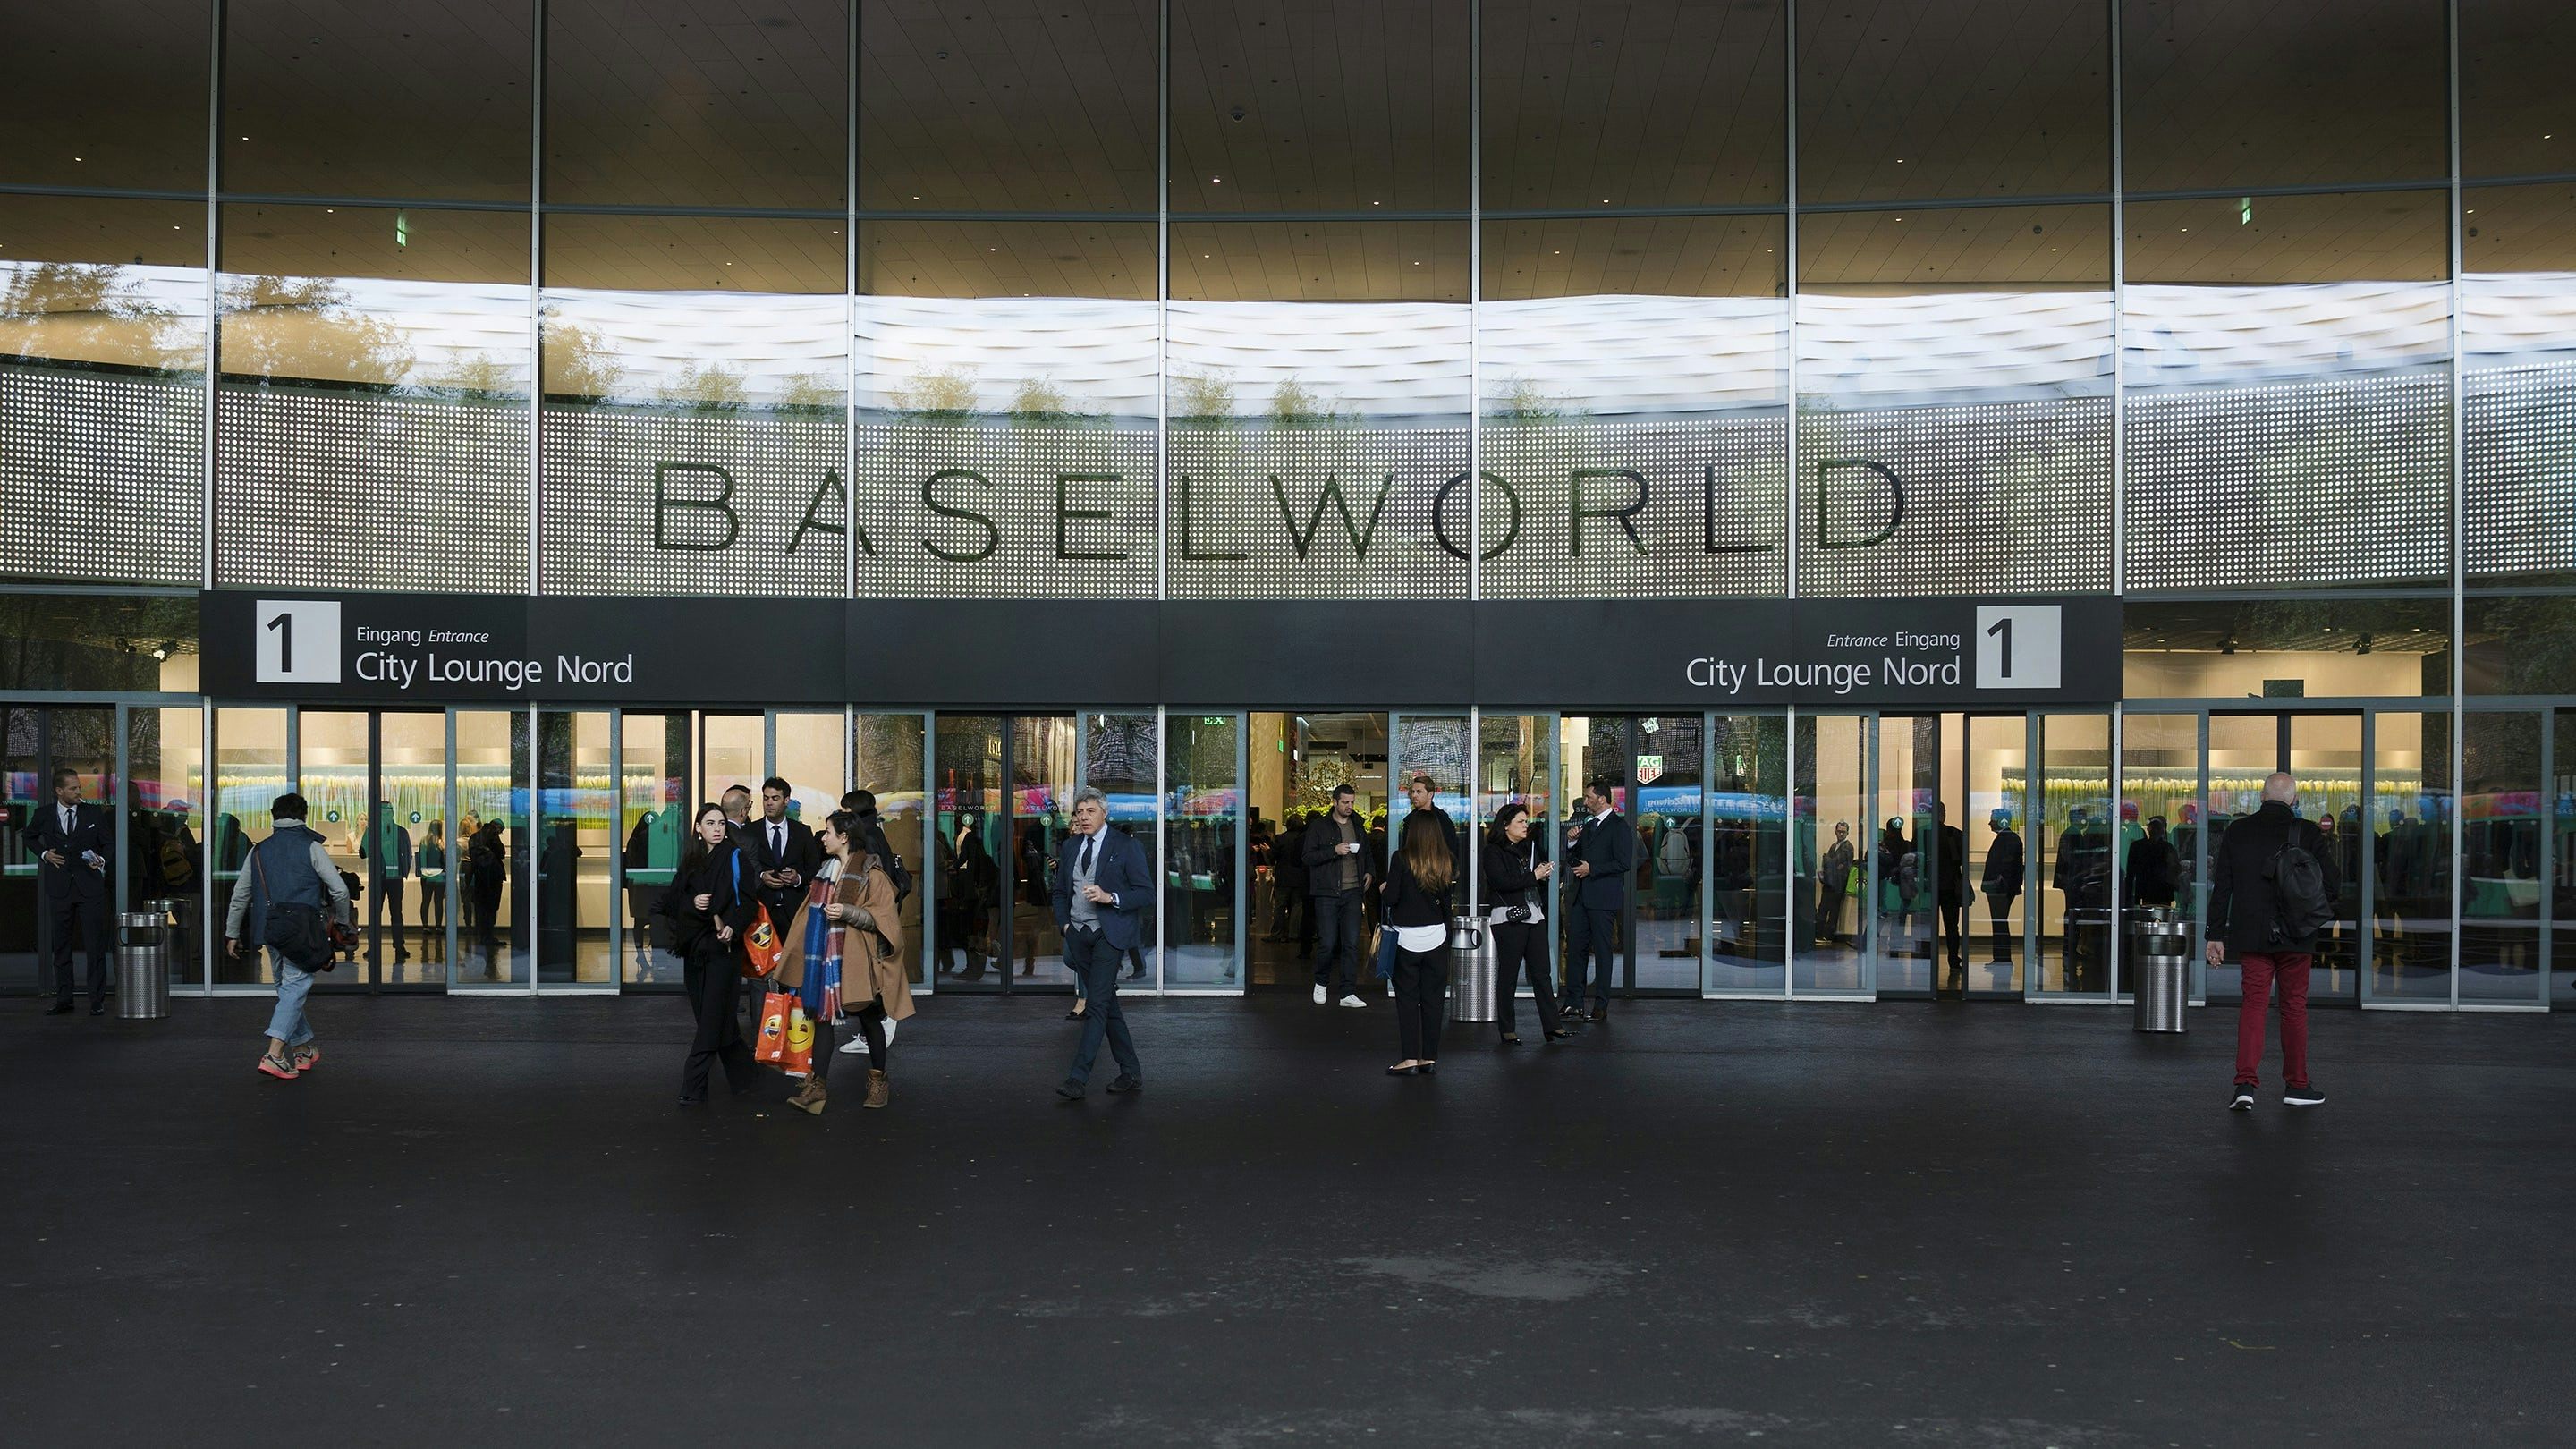 Rolex, Patek Philippe, And More Luxury Brands Leave Baselworld For New  Trade Show With Watches & Wonders In Geneva